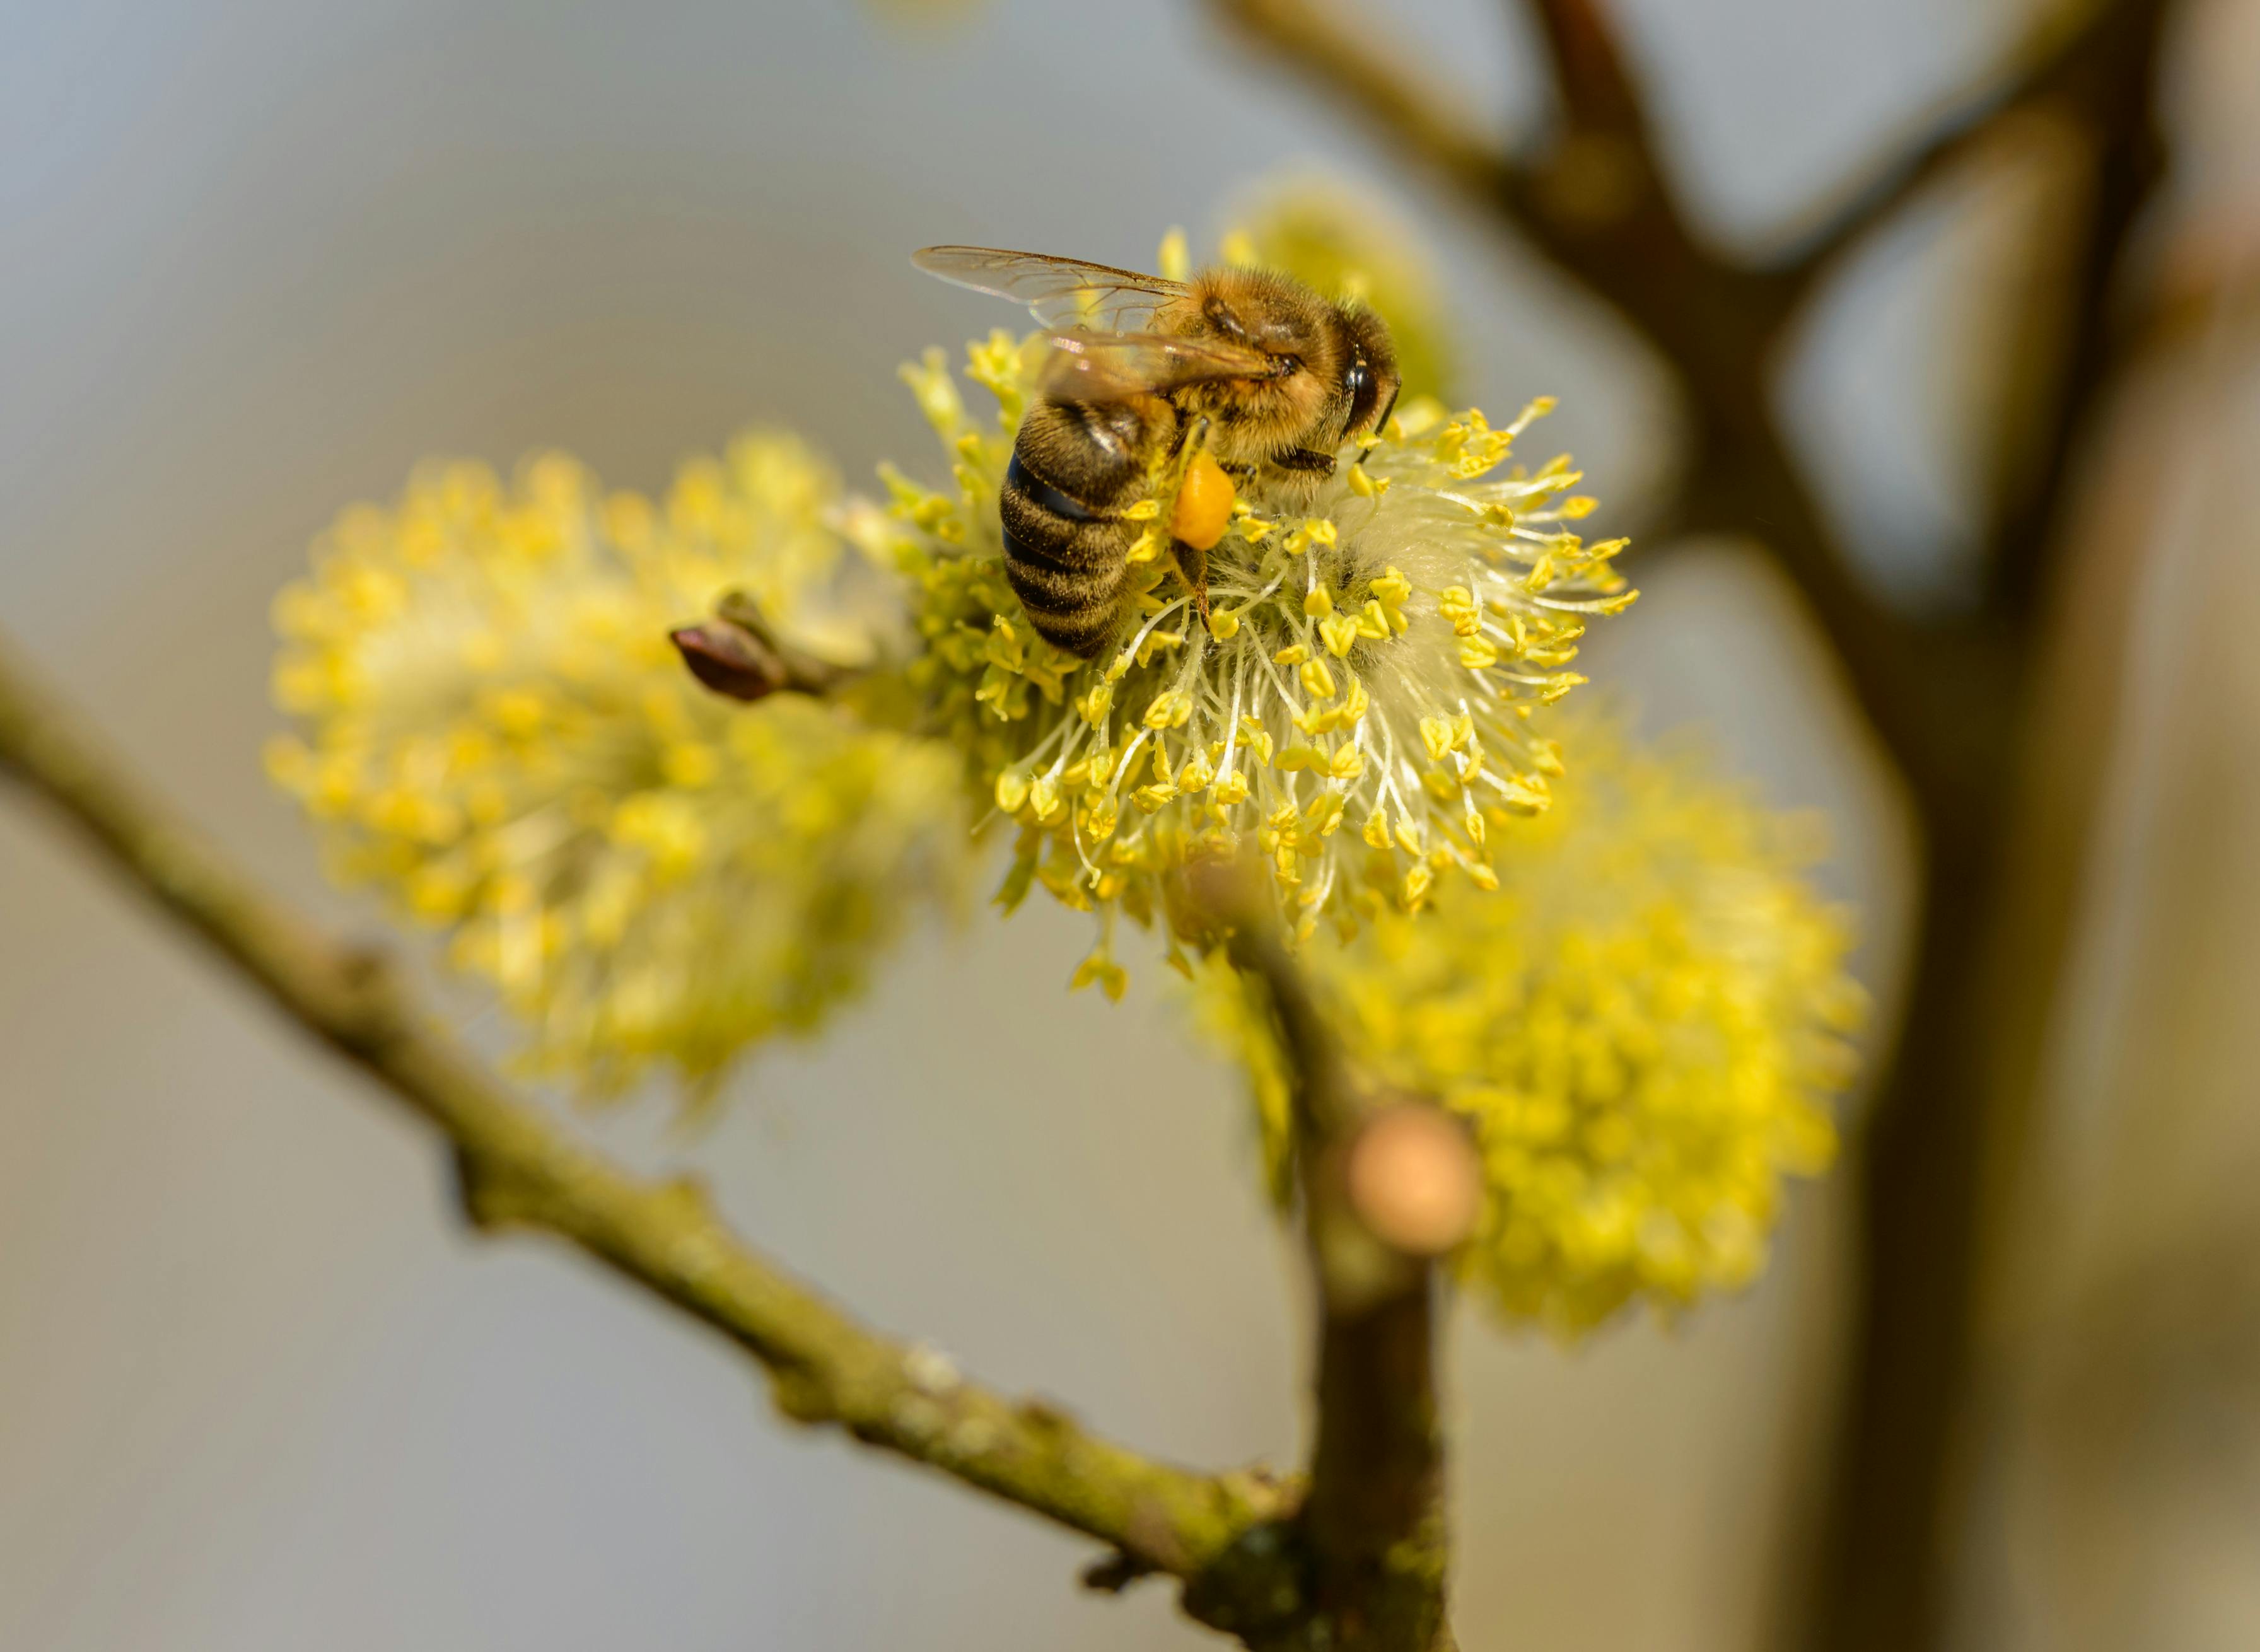 Bee on willow flowers stock photo. Image of color, shallow - 29645788